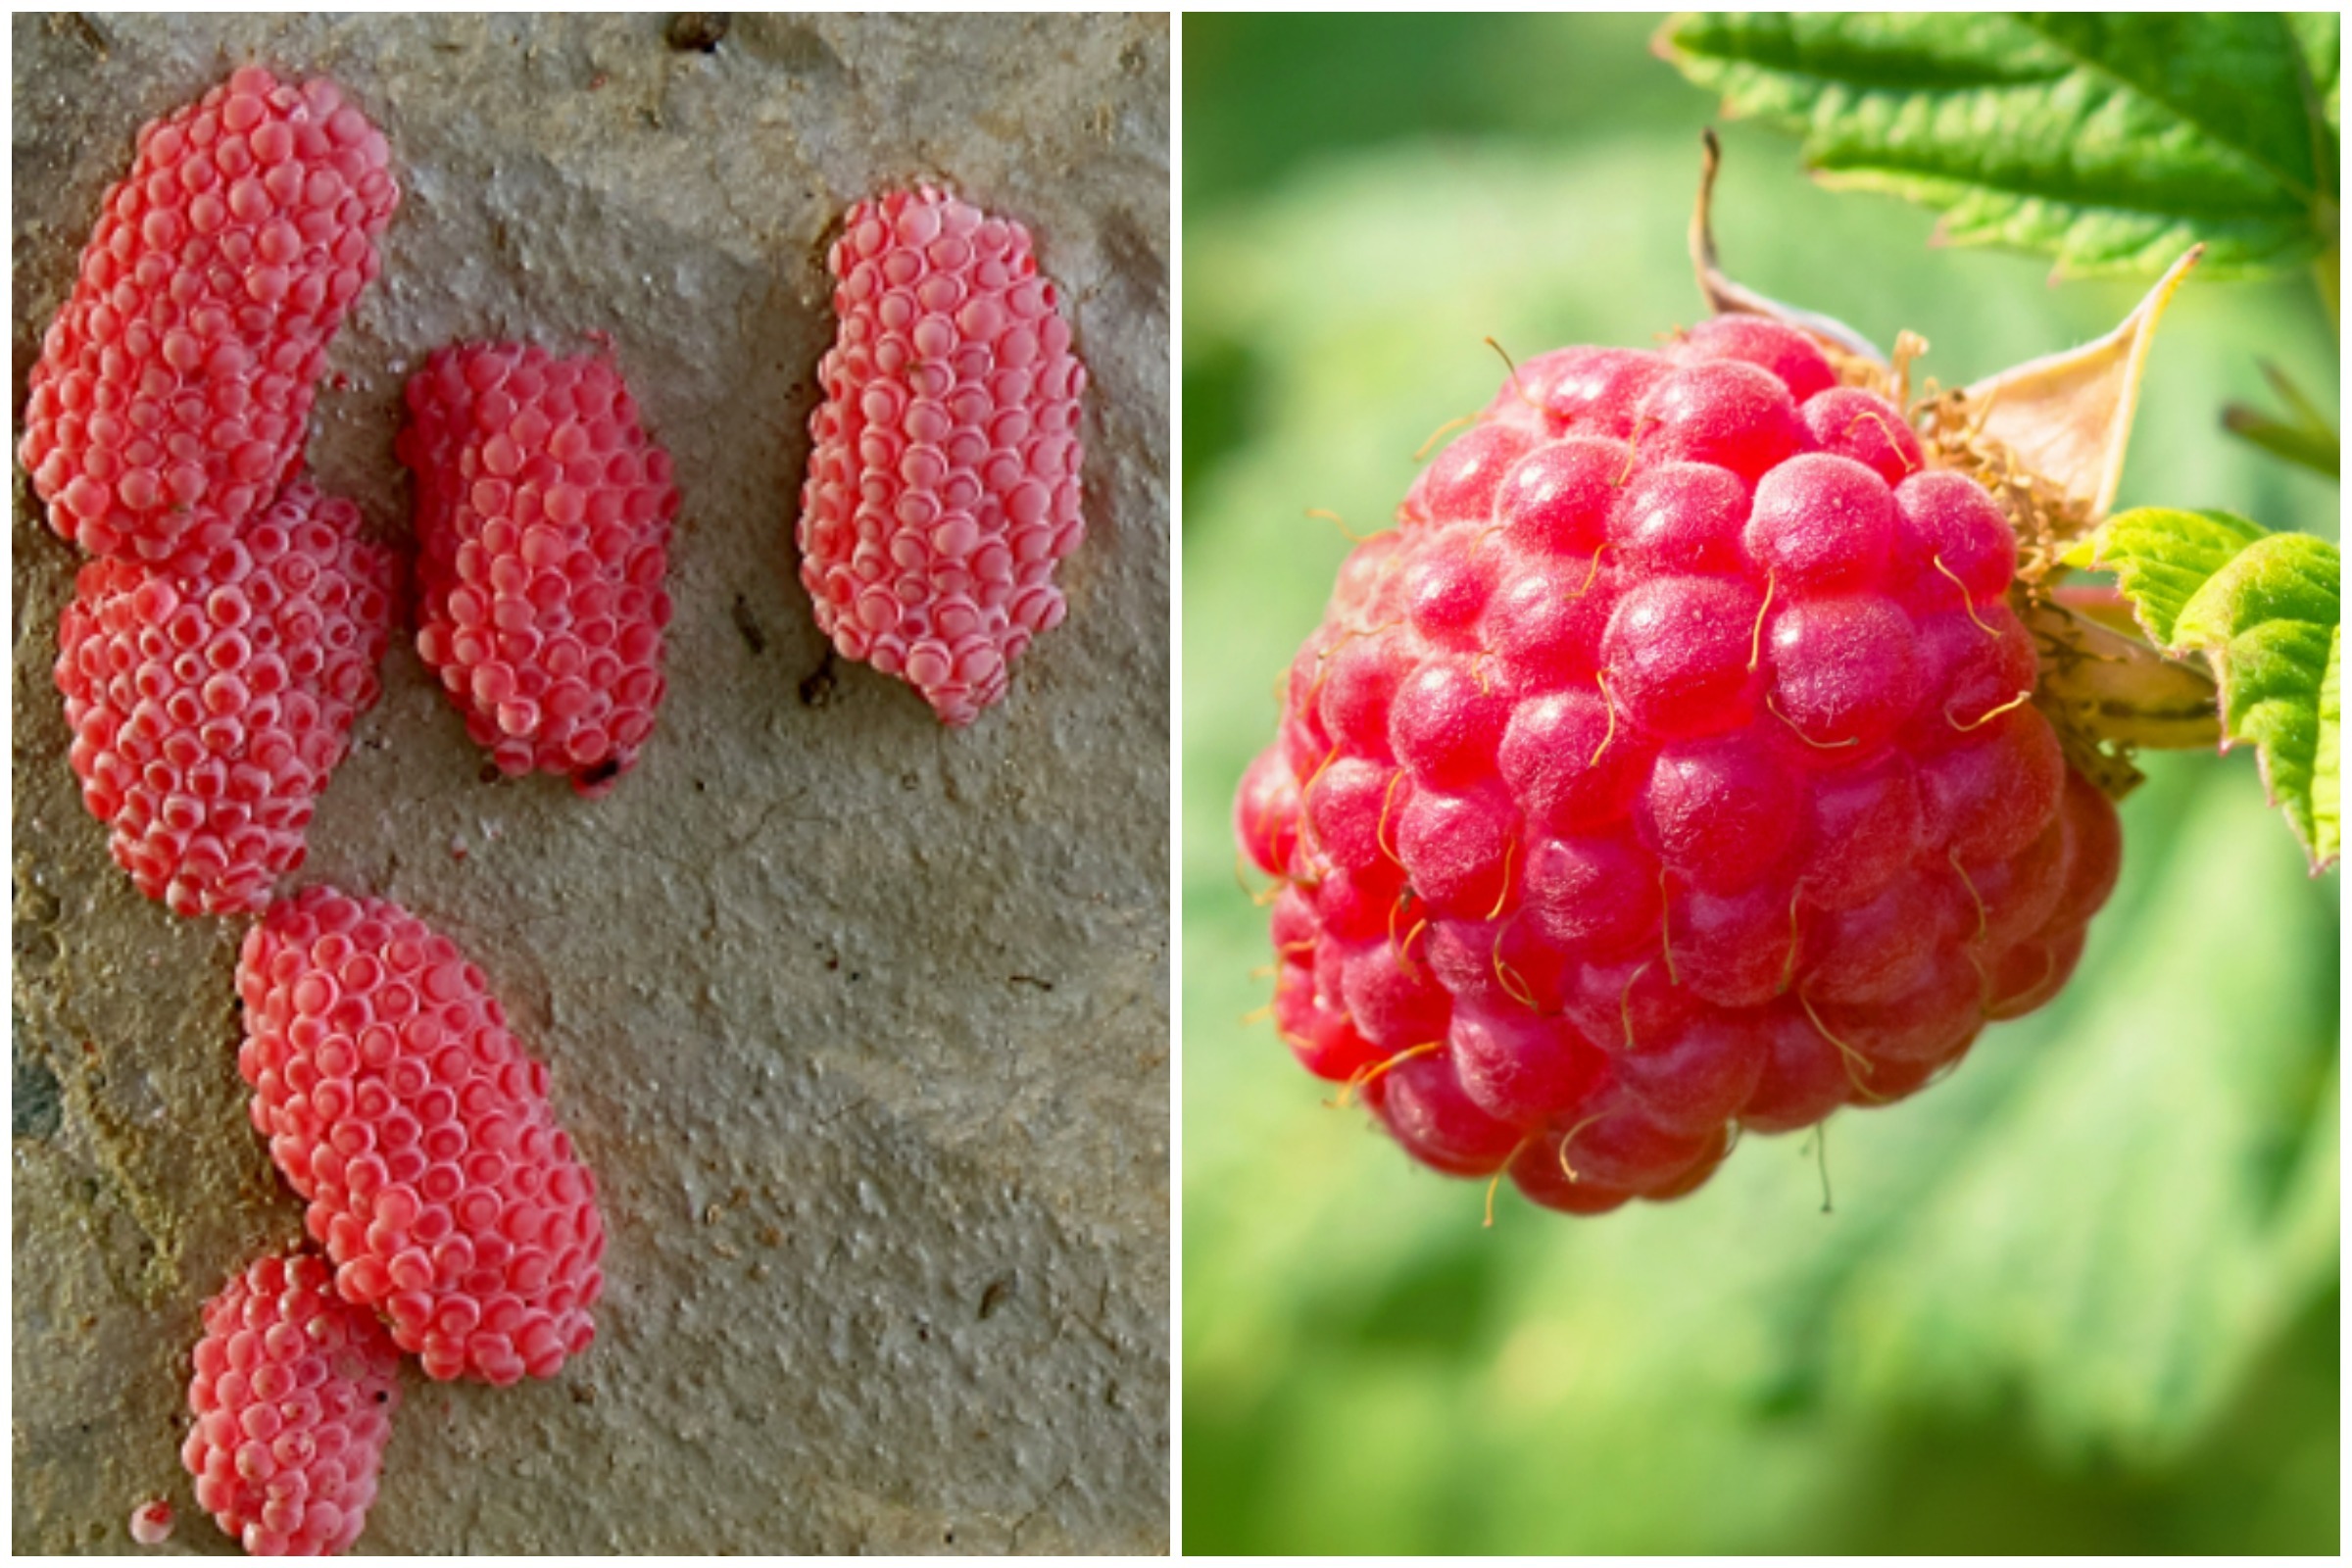 Poisonous Insect Eggs or Raspberries? The TikTok Trend Discussed